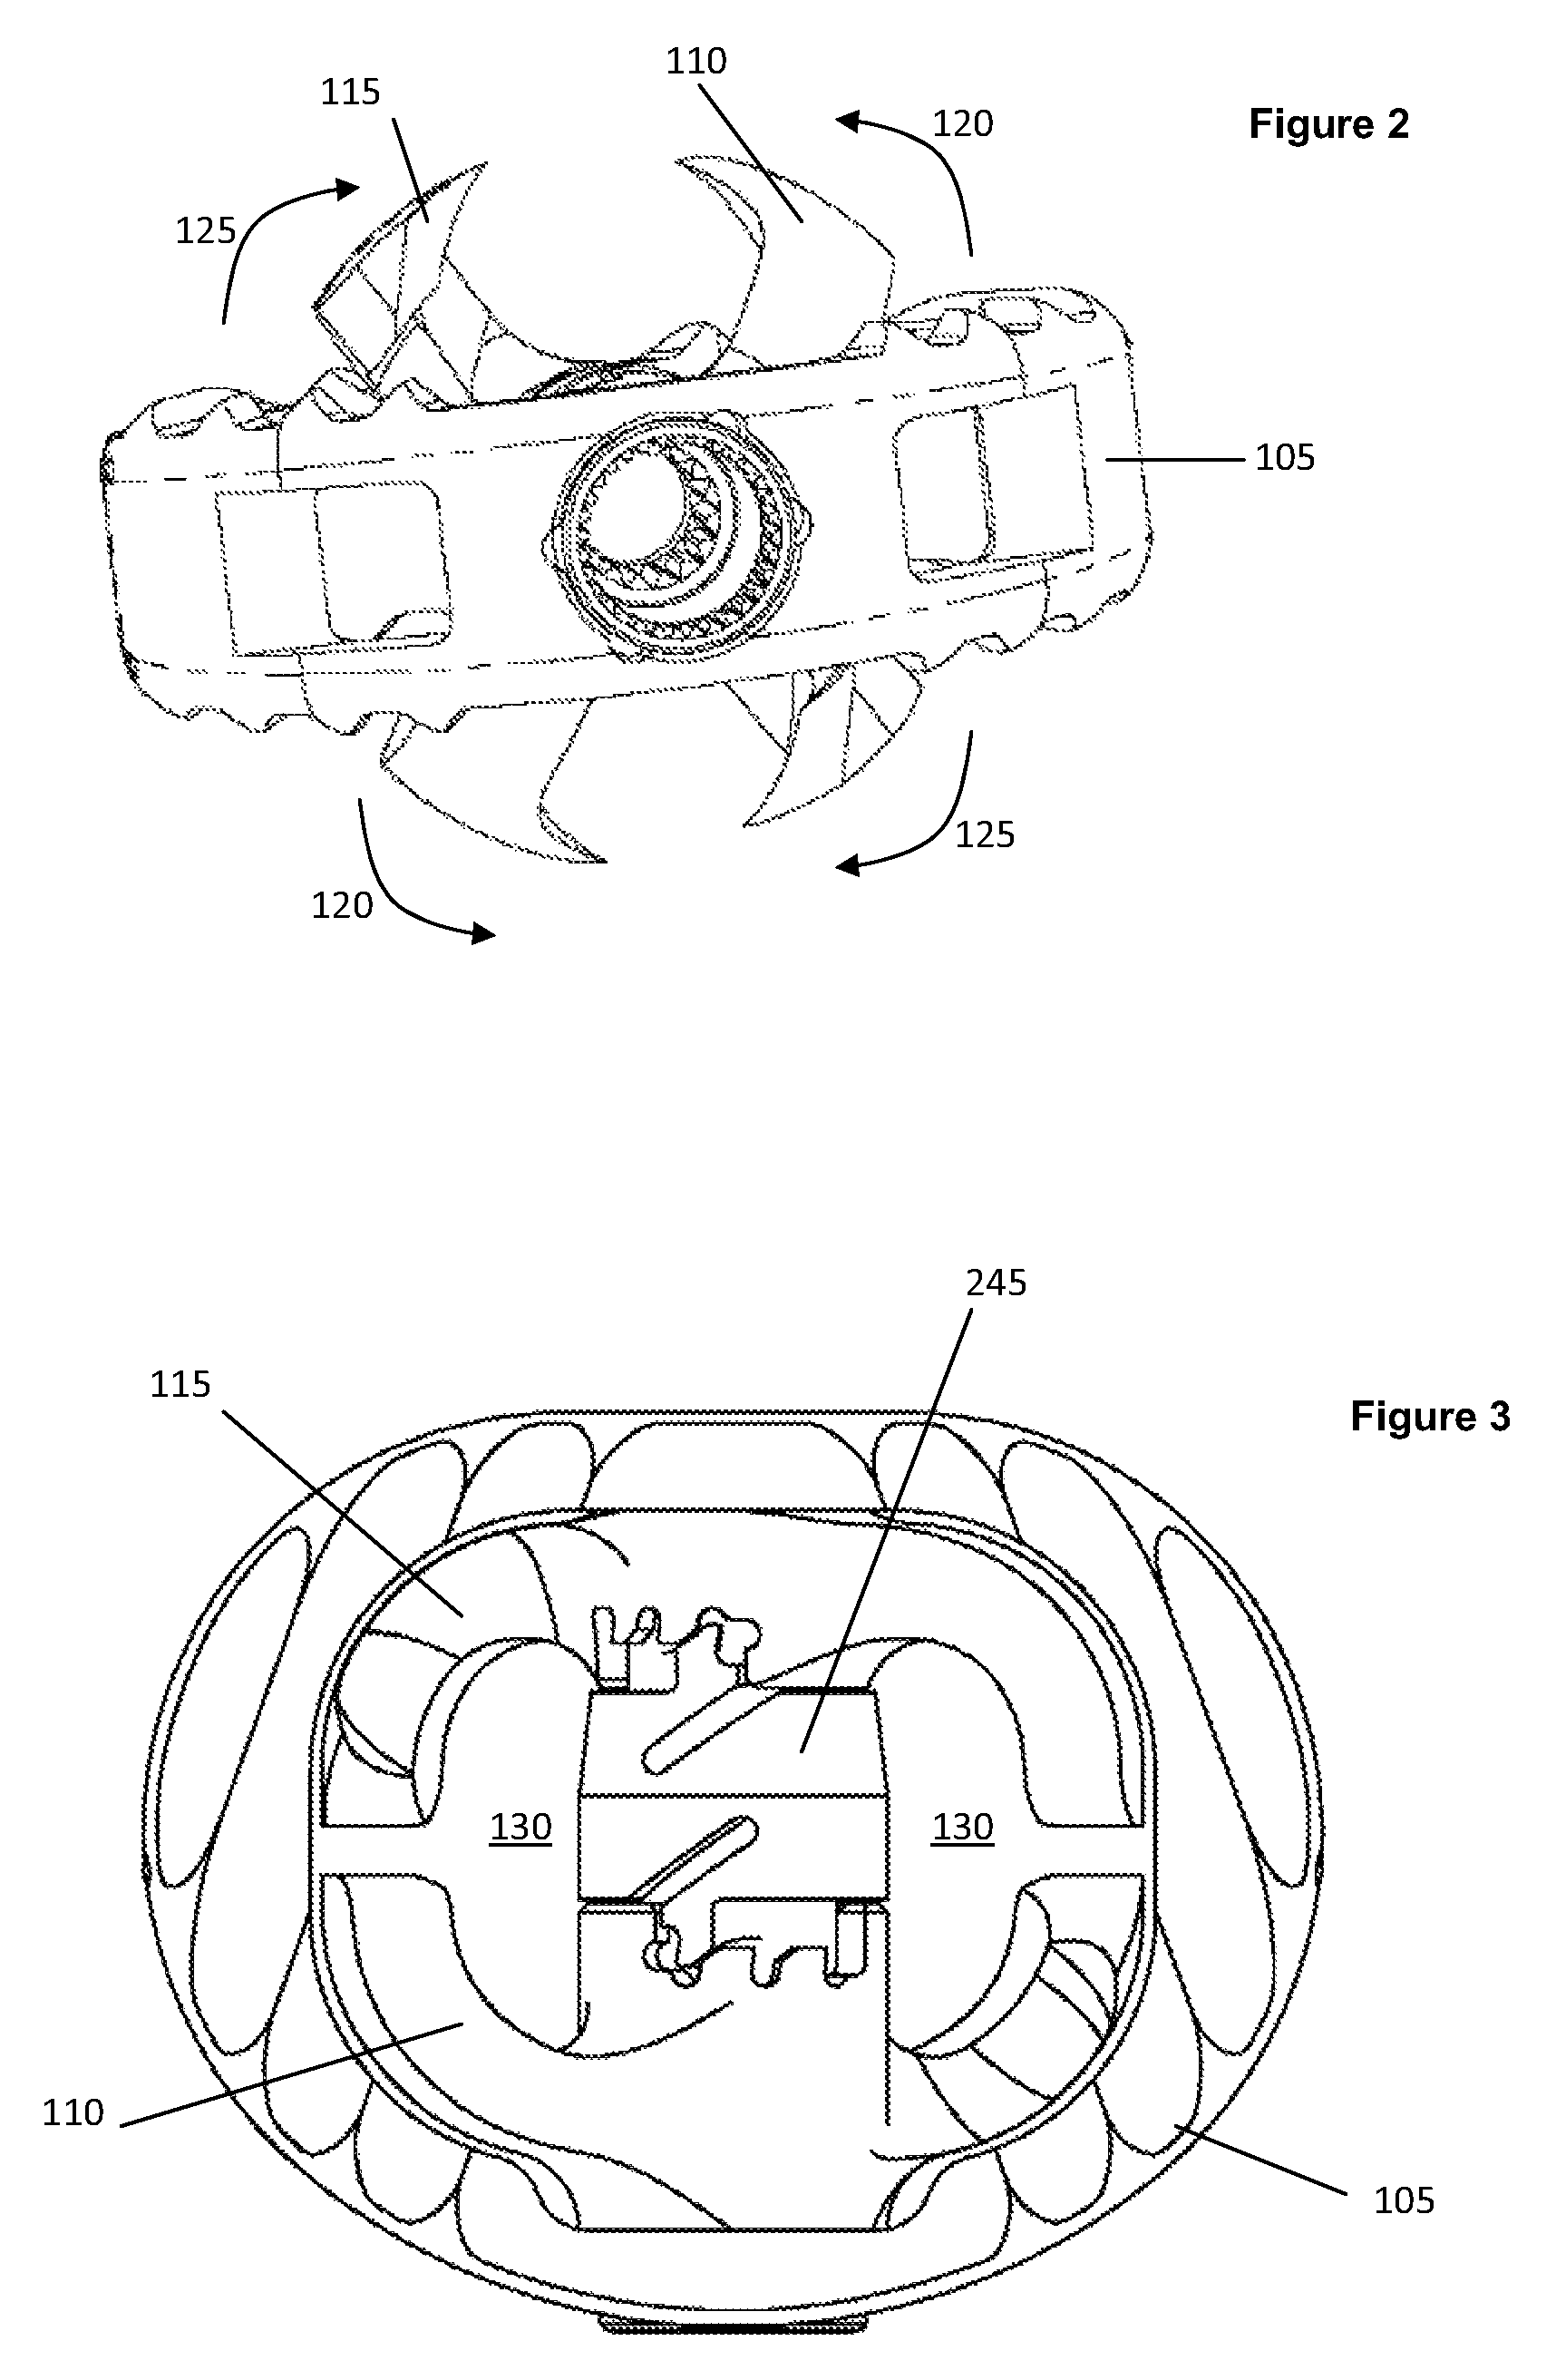 Stand-alone interbody fixation system